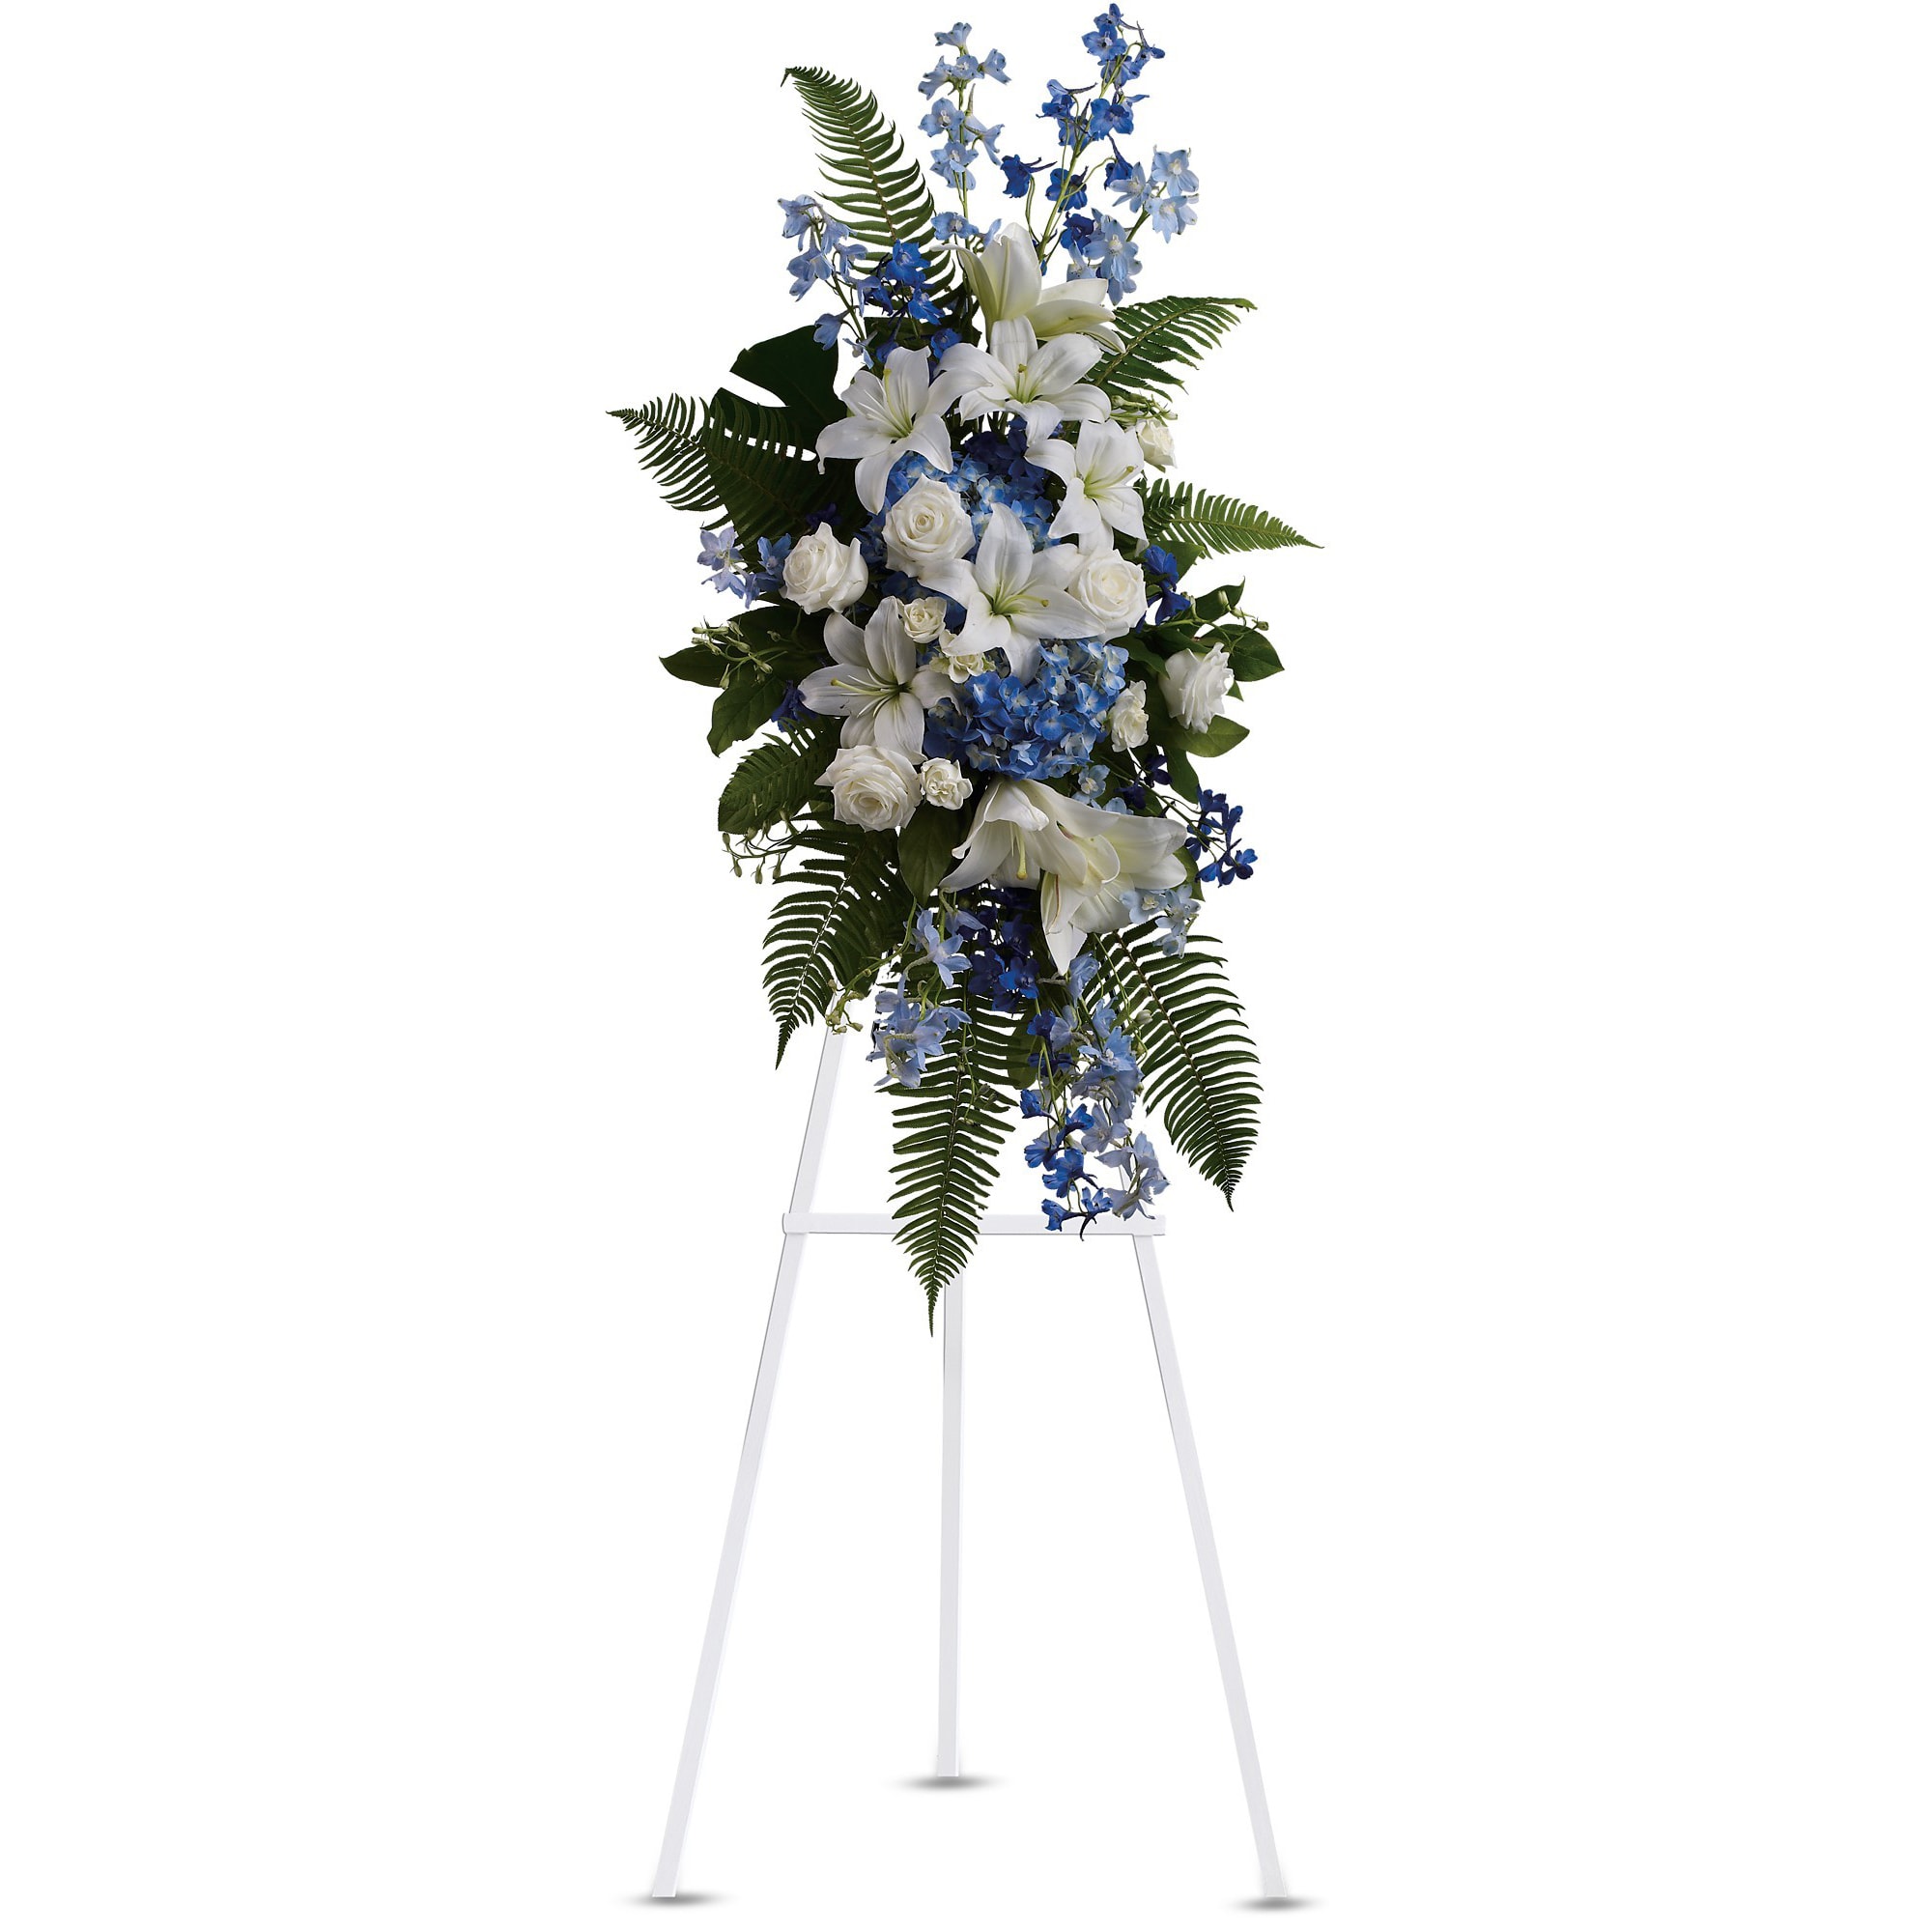 Ocean Breezes Spray - Express deep condolences and strong hopes for the future with an elegant tribute that conveys admiration, affection and respect. 